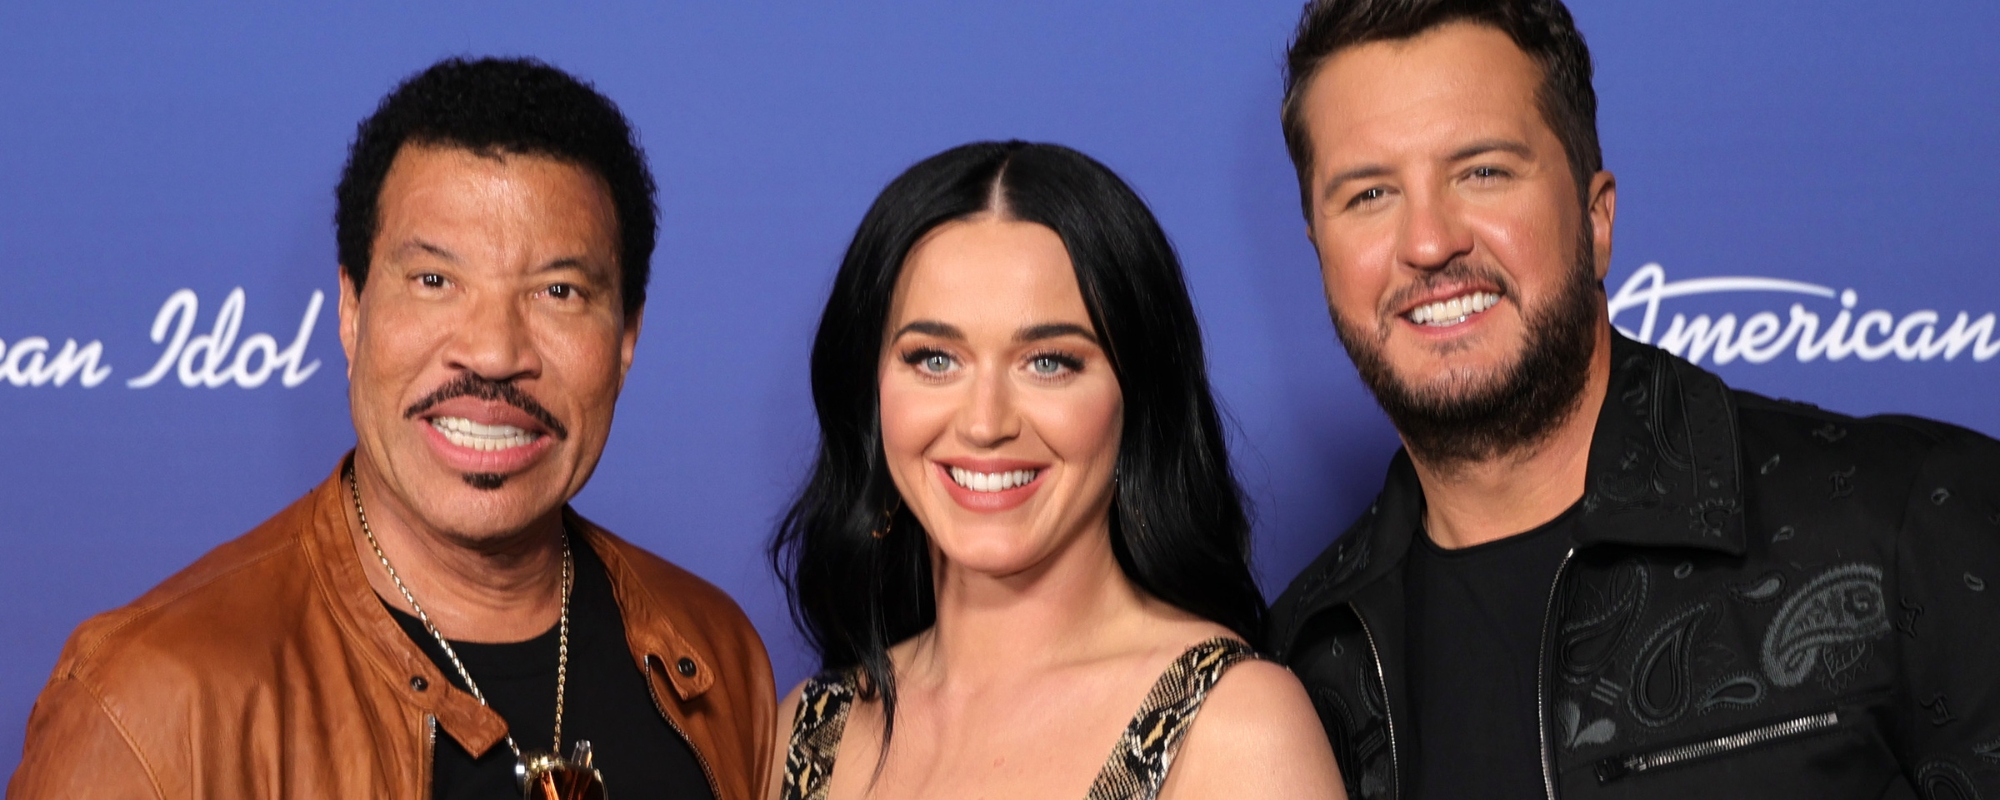 ‘American Idol’ Sources Say Iconic Winner Is Close to Officially Replacing Katy Perry